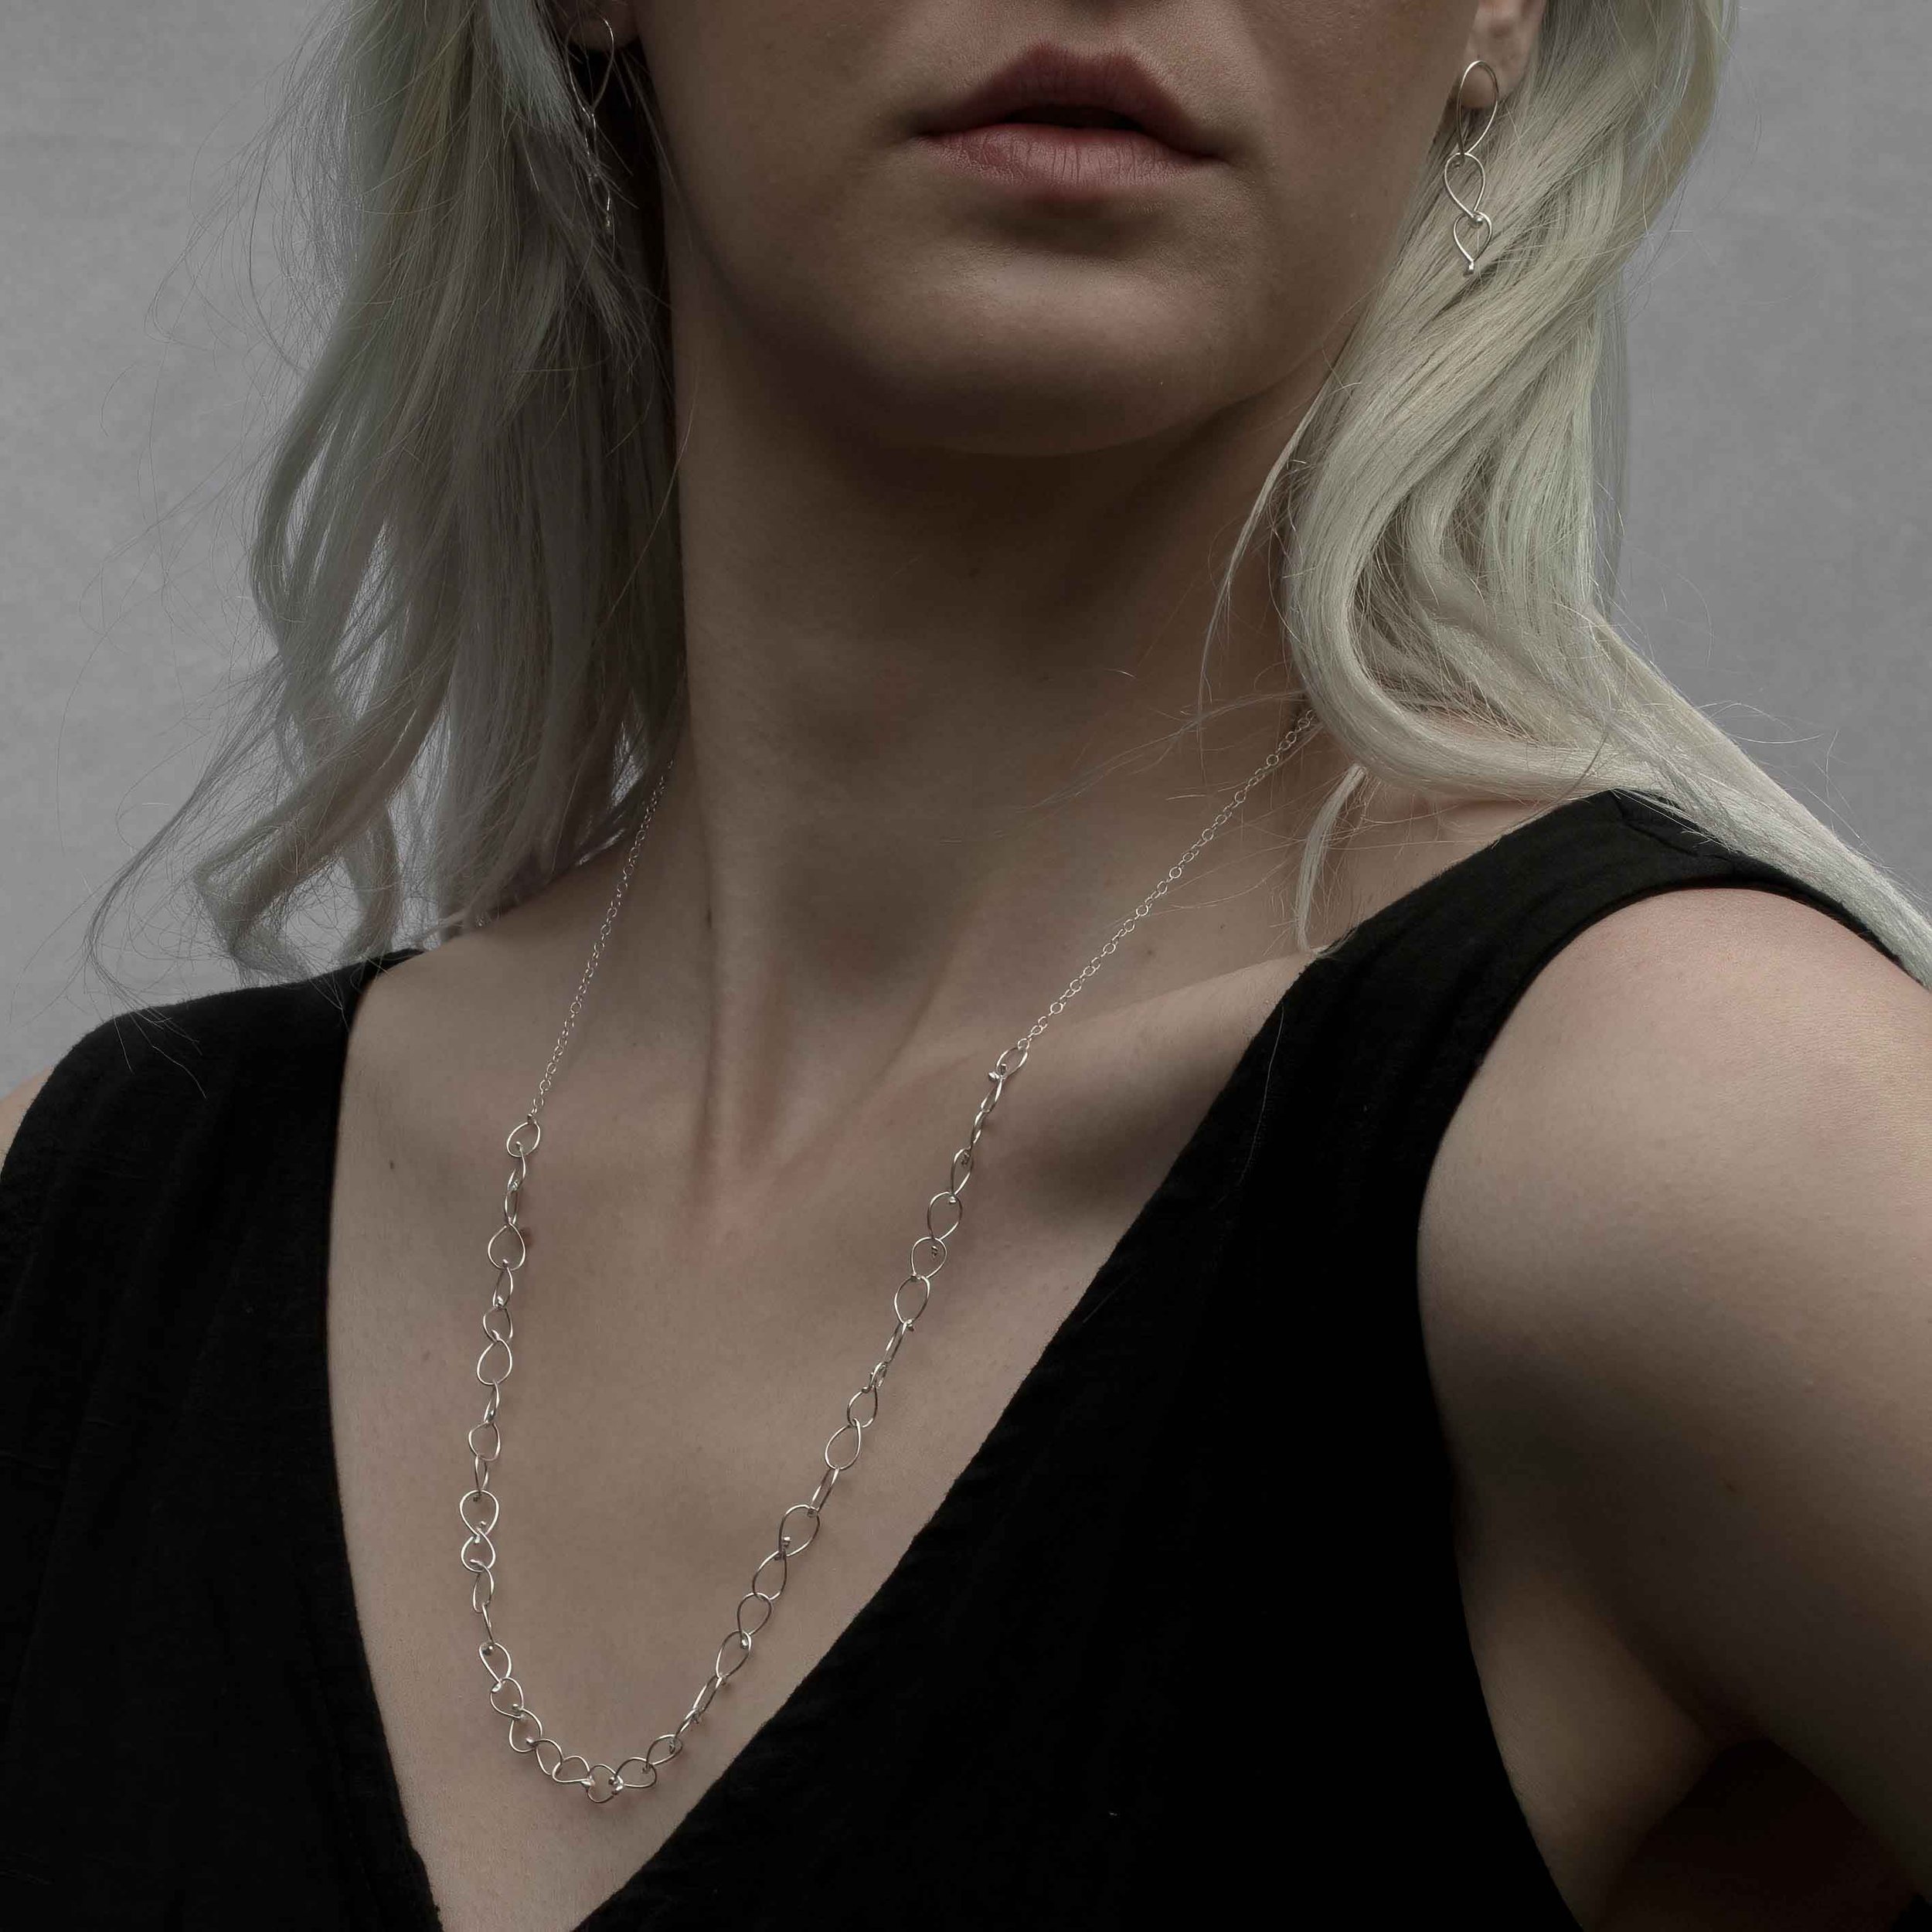 Chain necklace and earrings by Sarah Ruth Stanford Jewellery